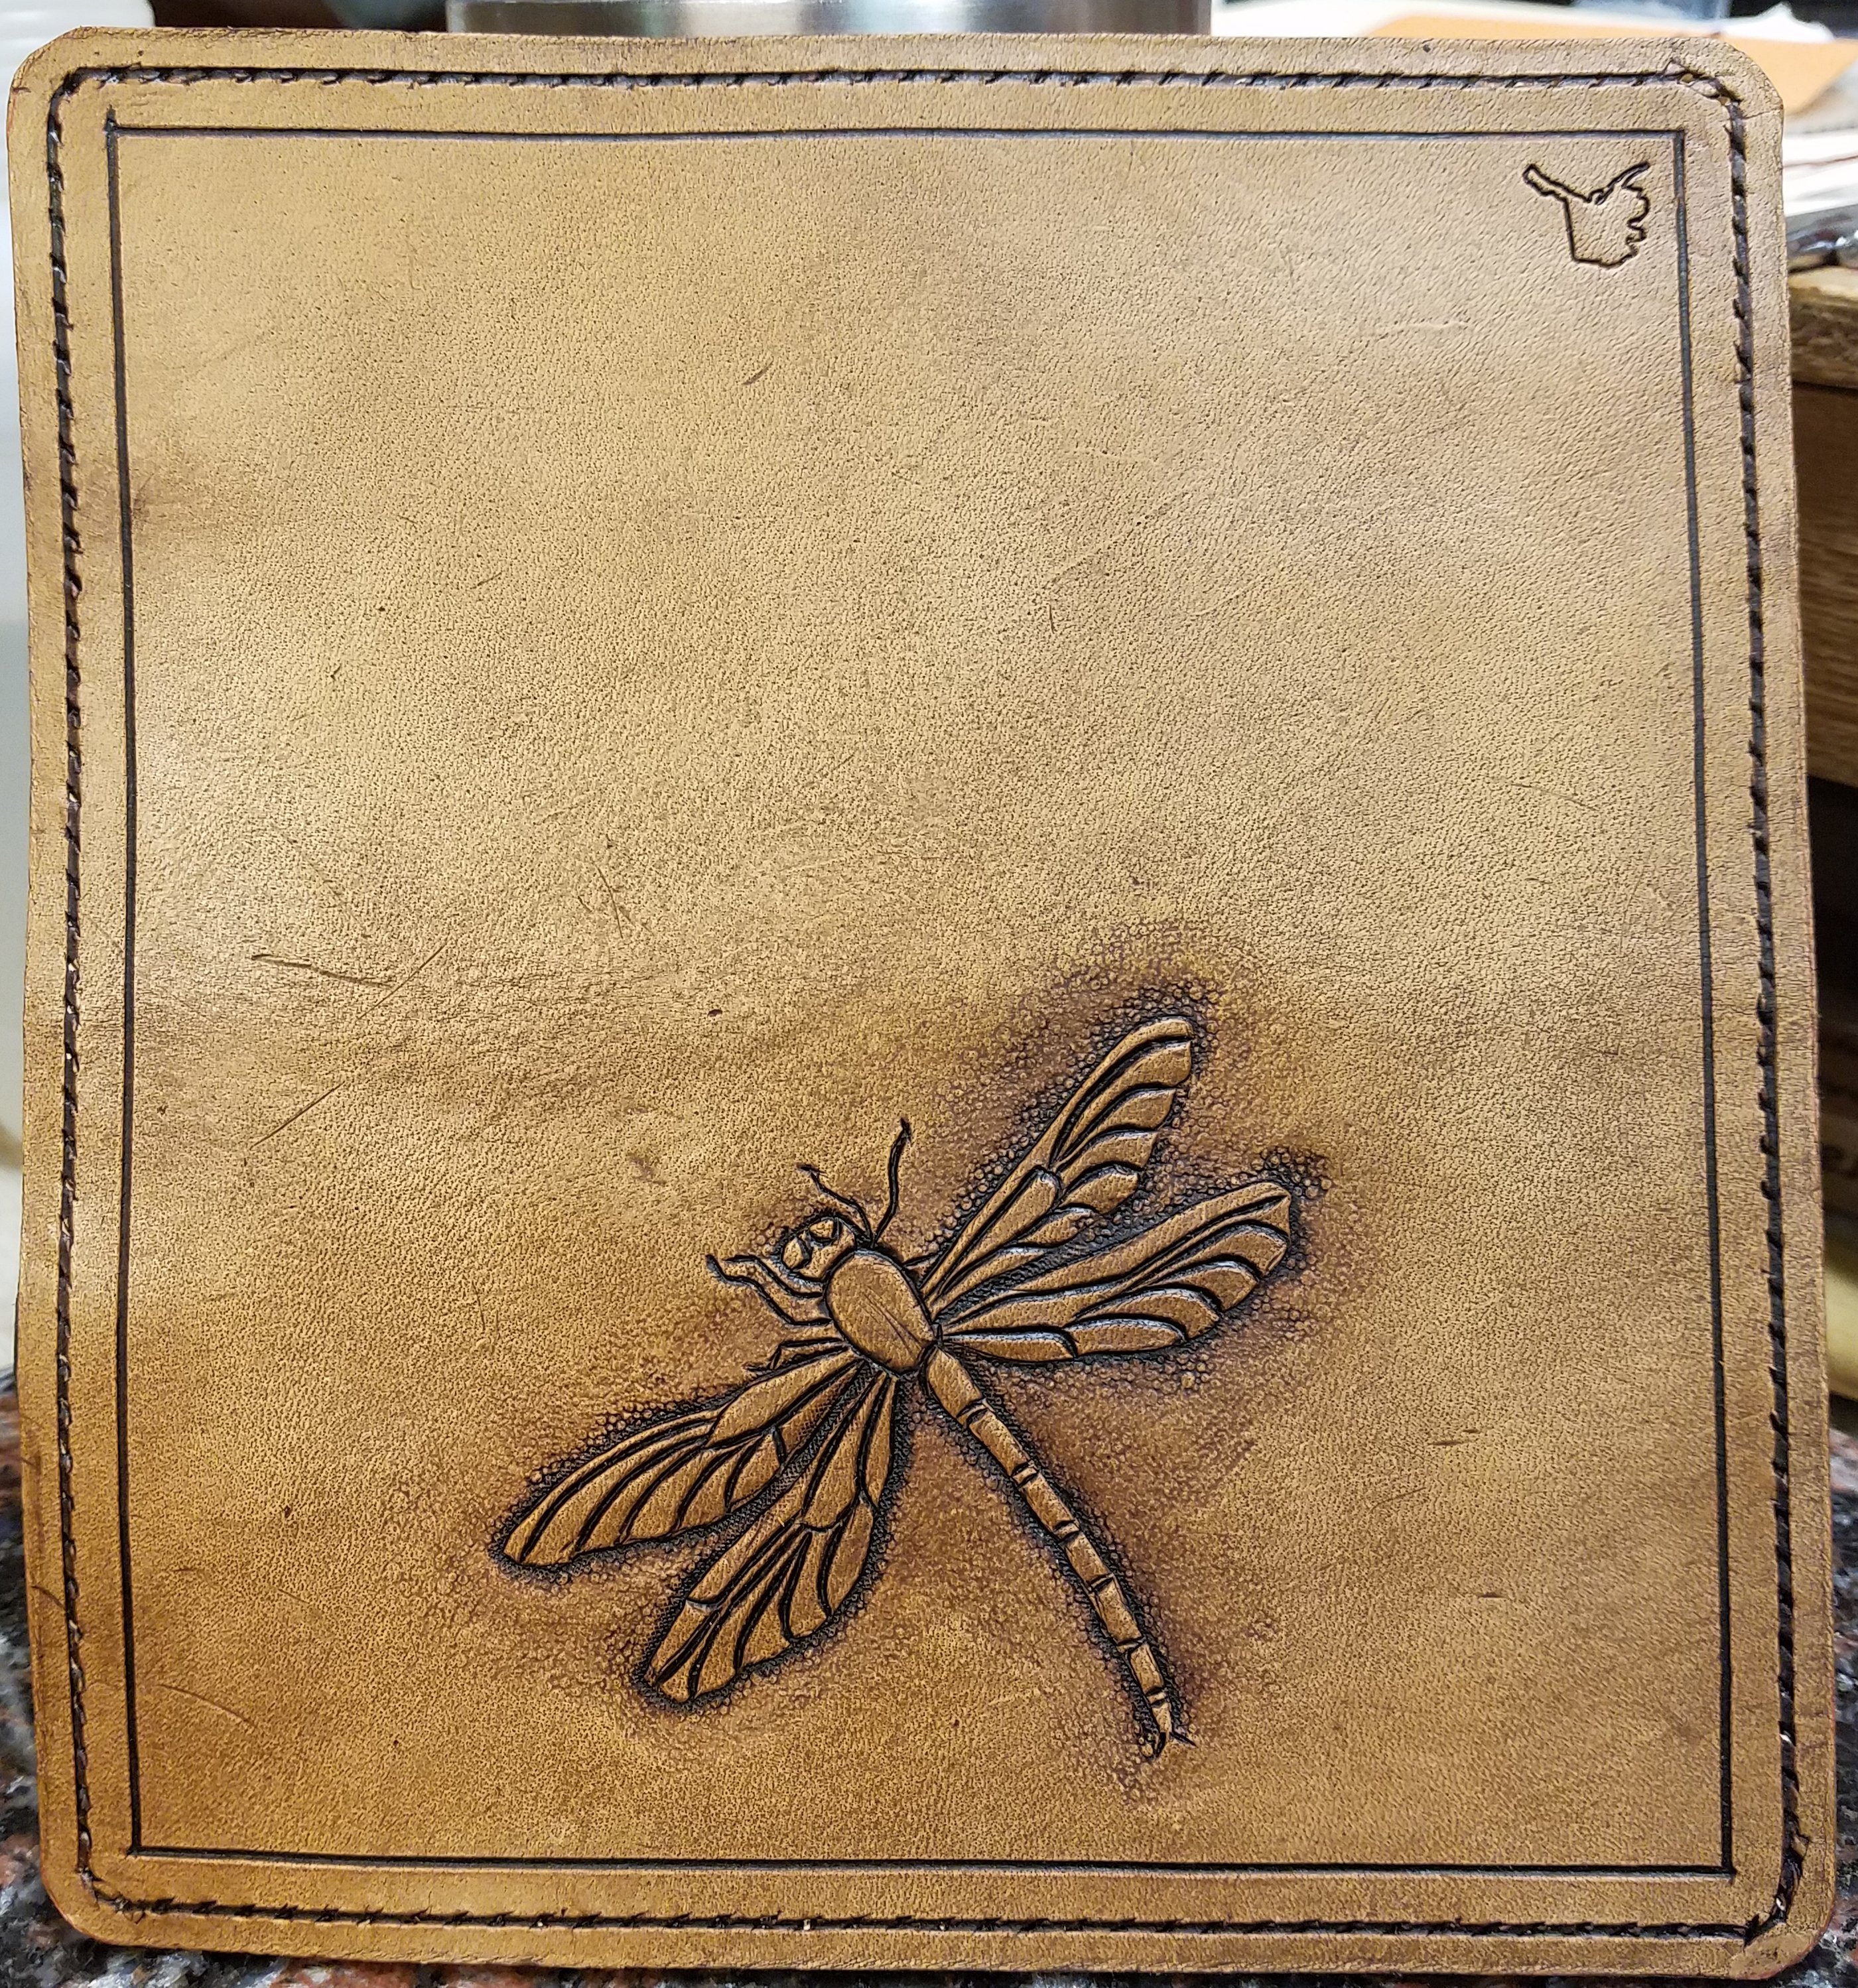 Dragonfly checkbook cover, hand tooled and stitched, $85.00    SOLD